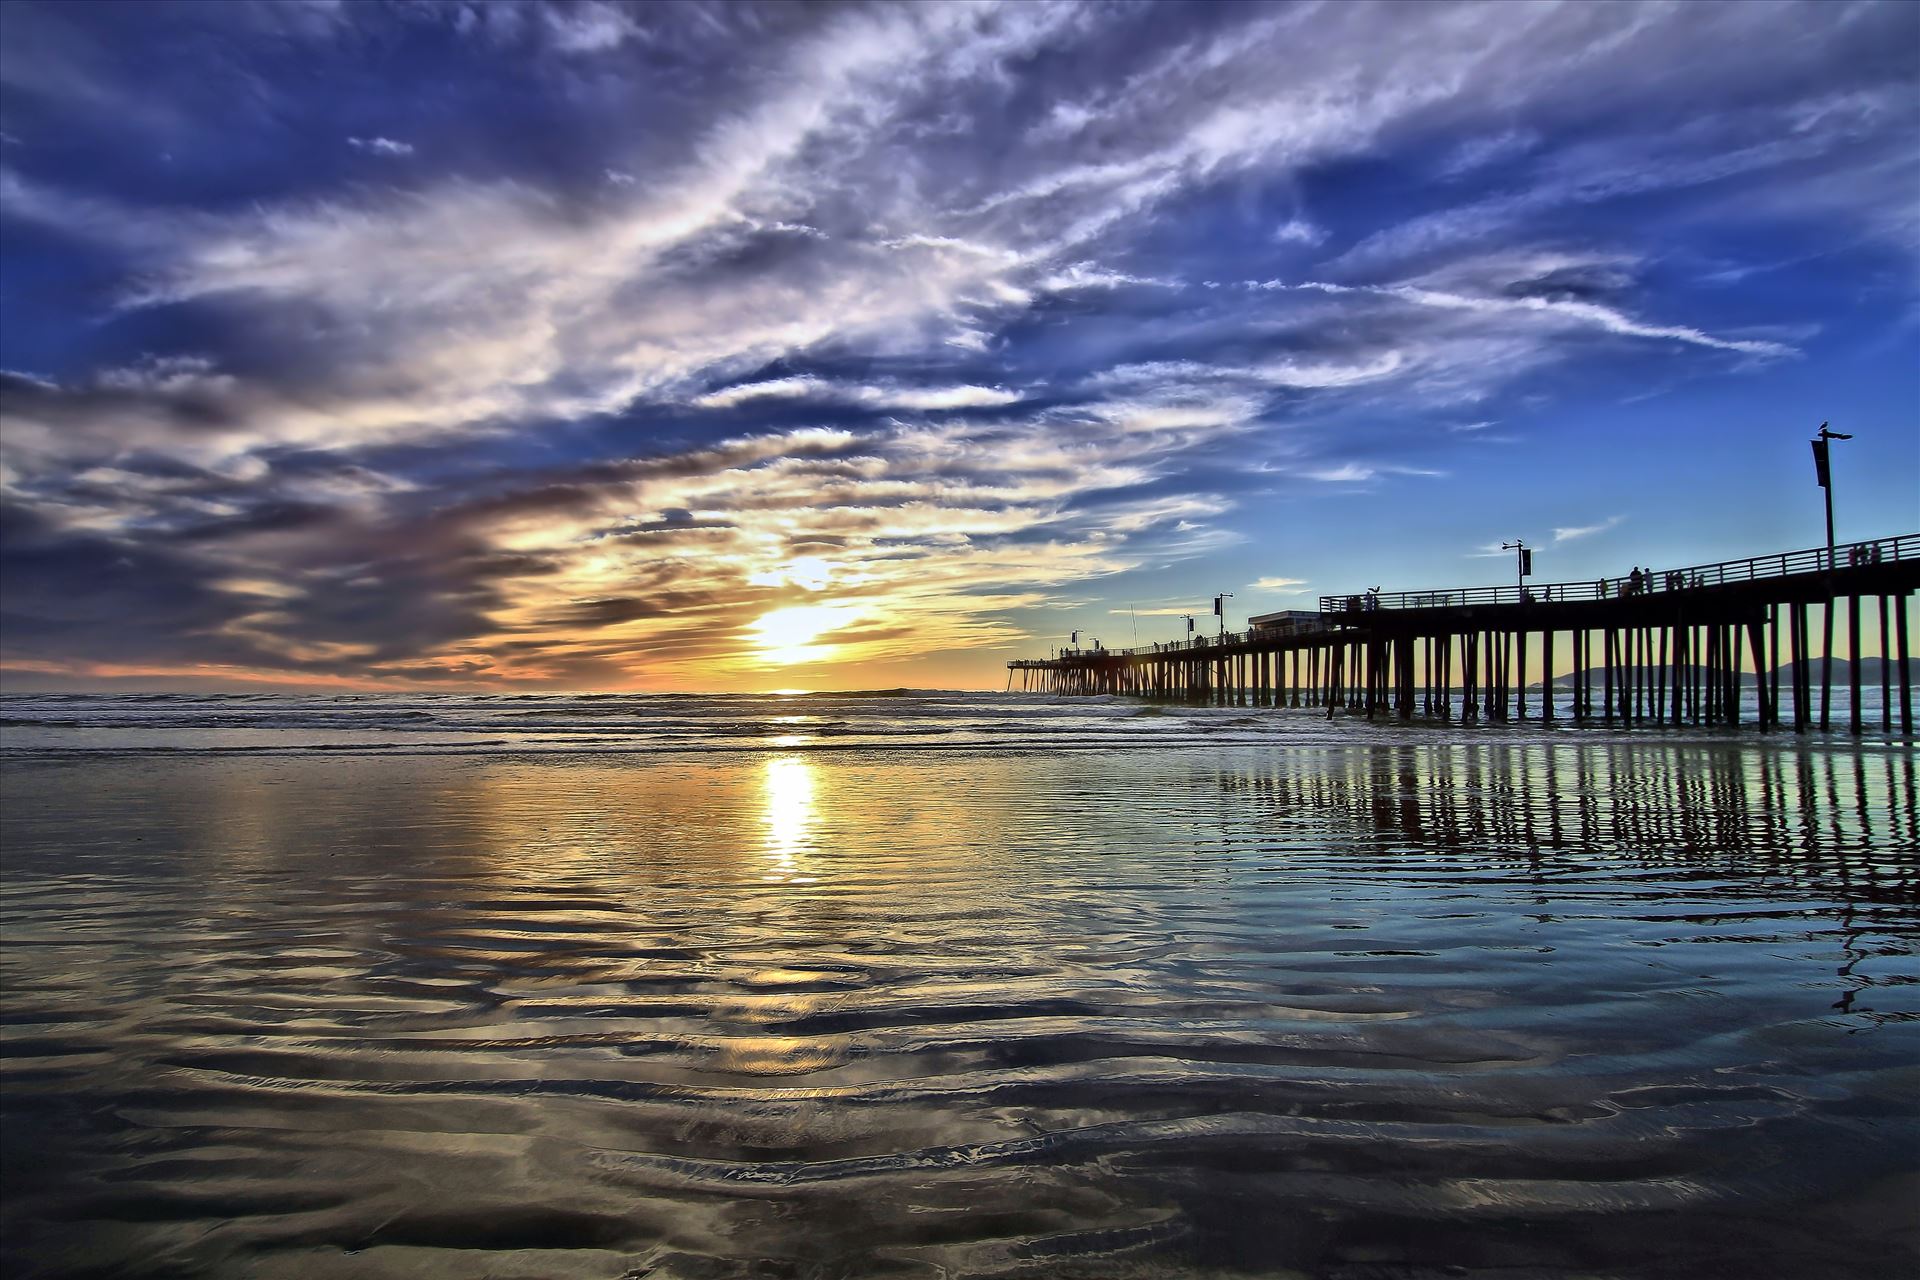 Pismo Pier Sunset - Reflections of the Pismo Beach Pier on a silvery beach. by Emotions Photography